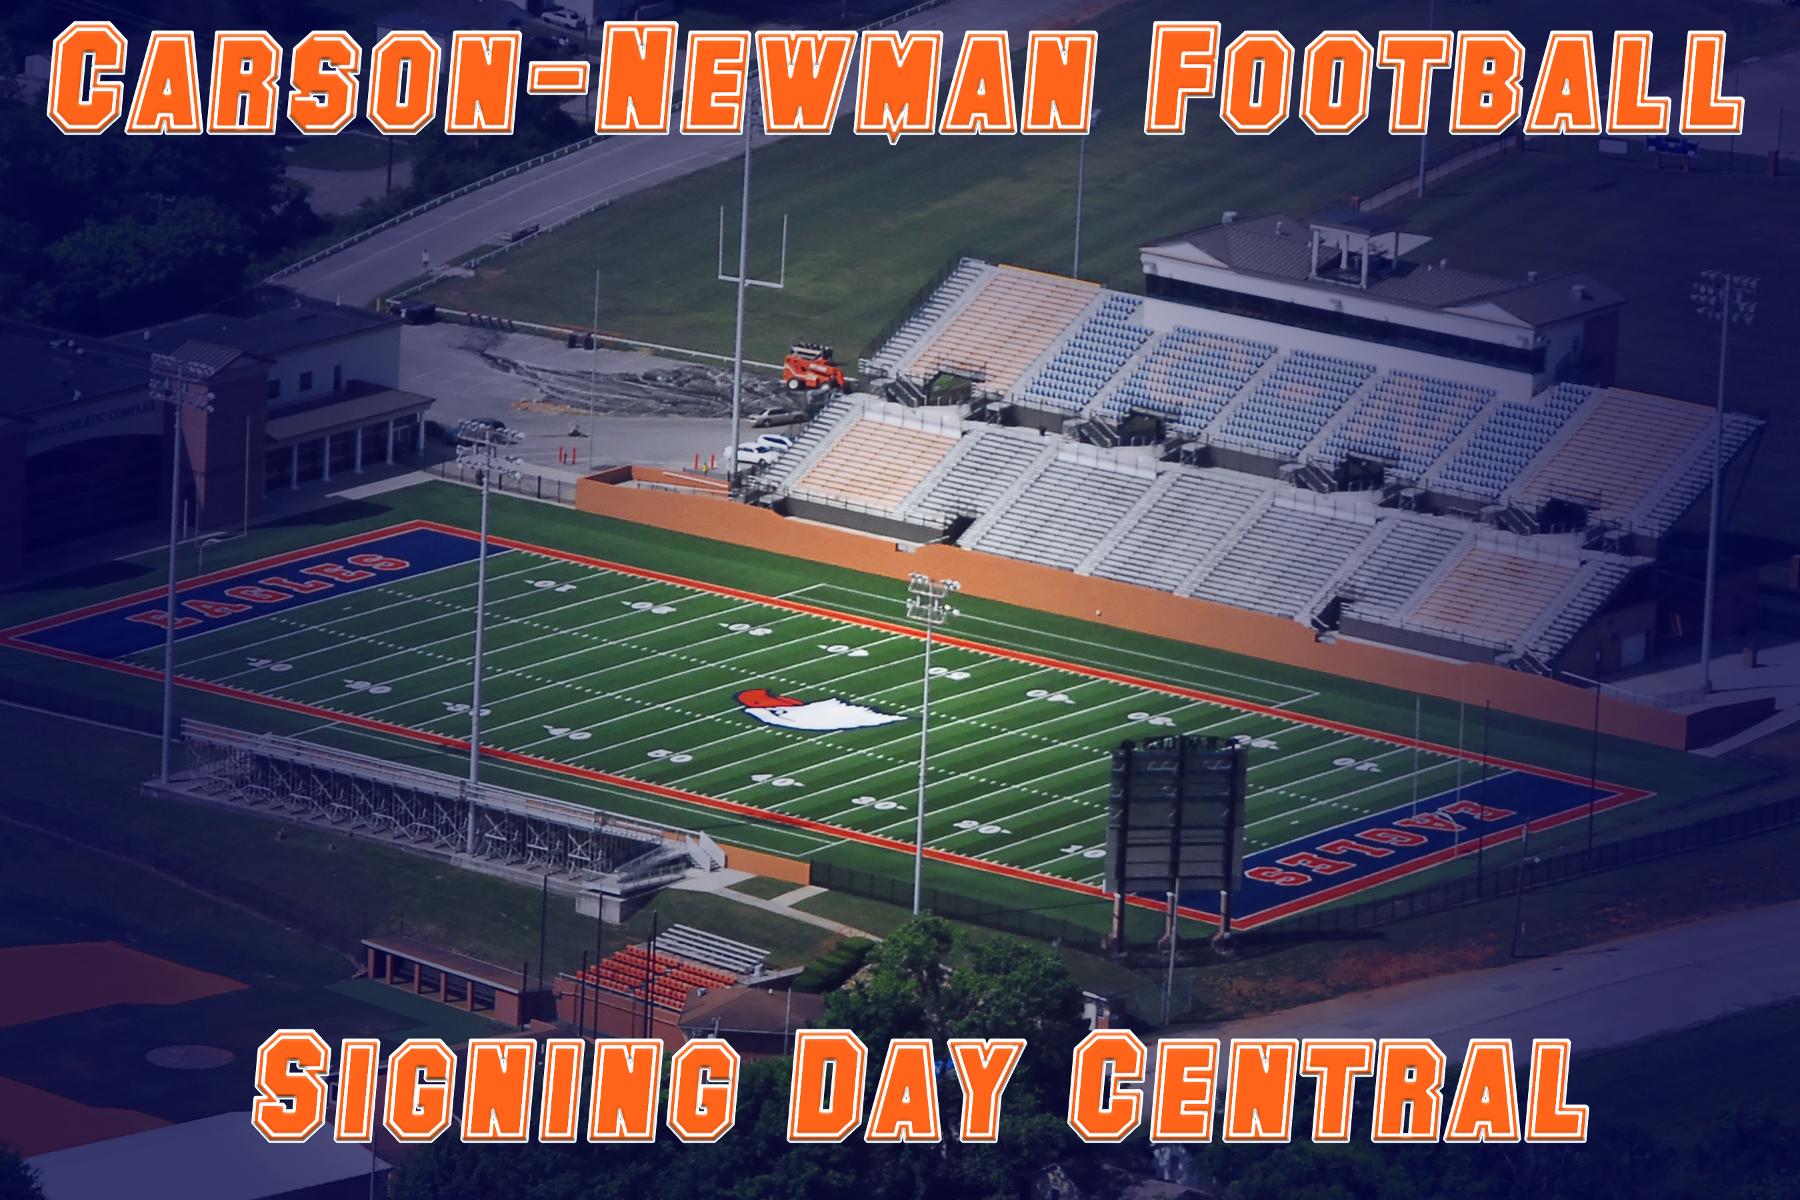 2016 Carson-Newman Football Signing Day Central